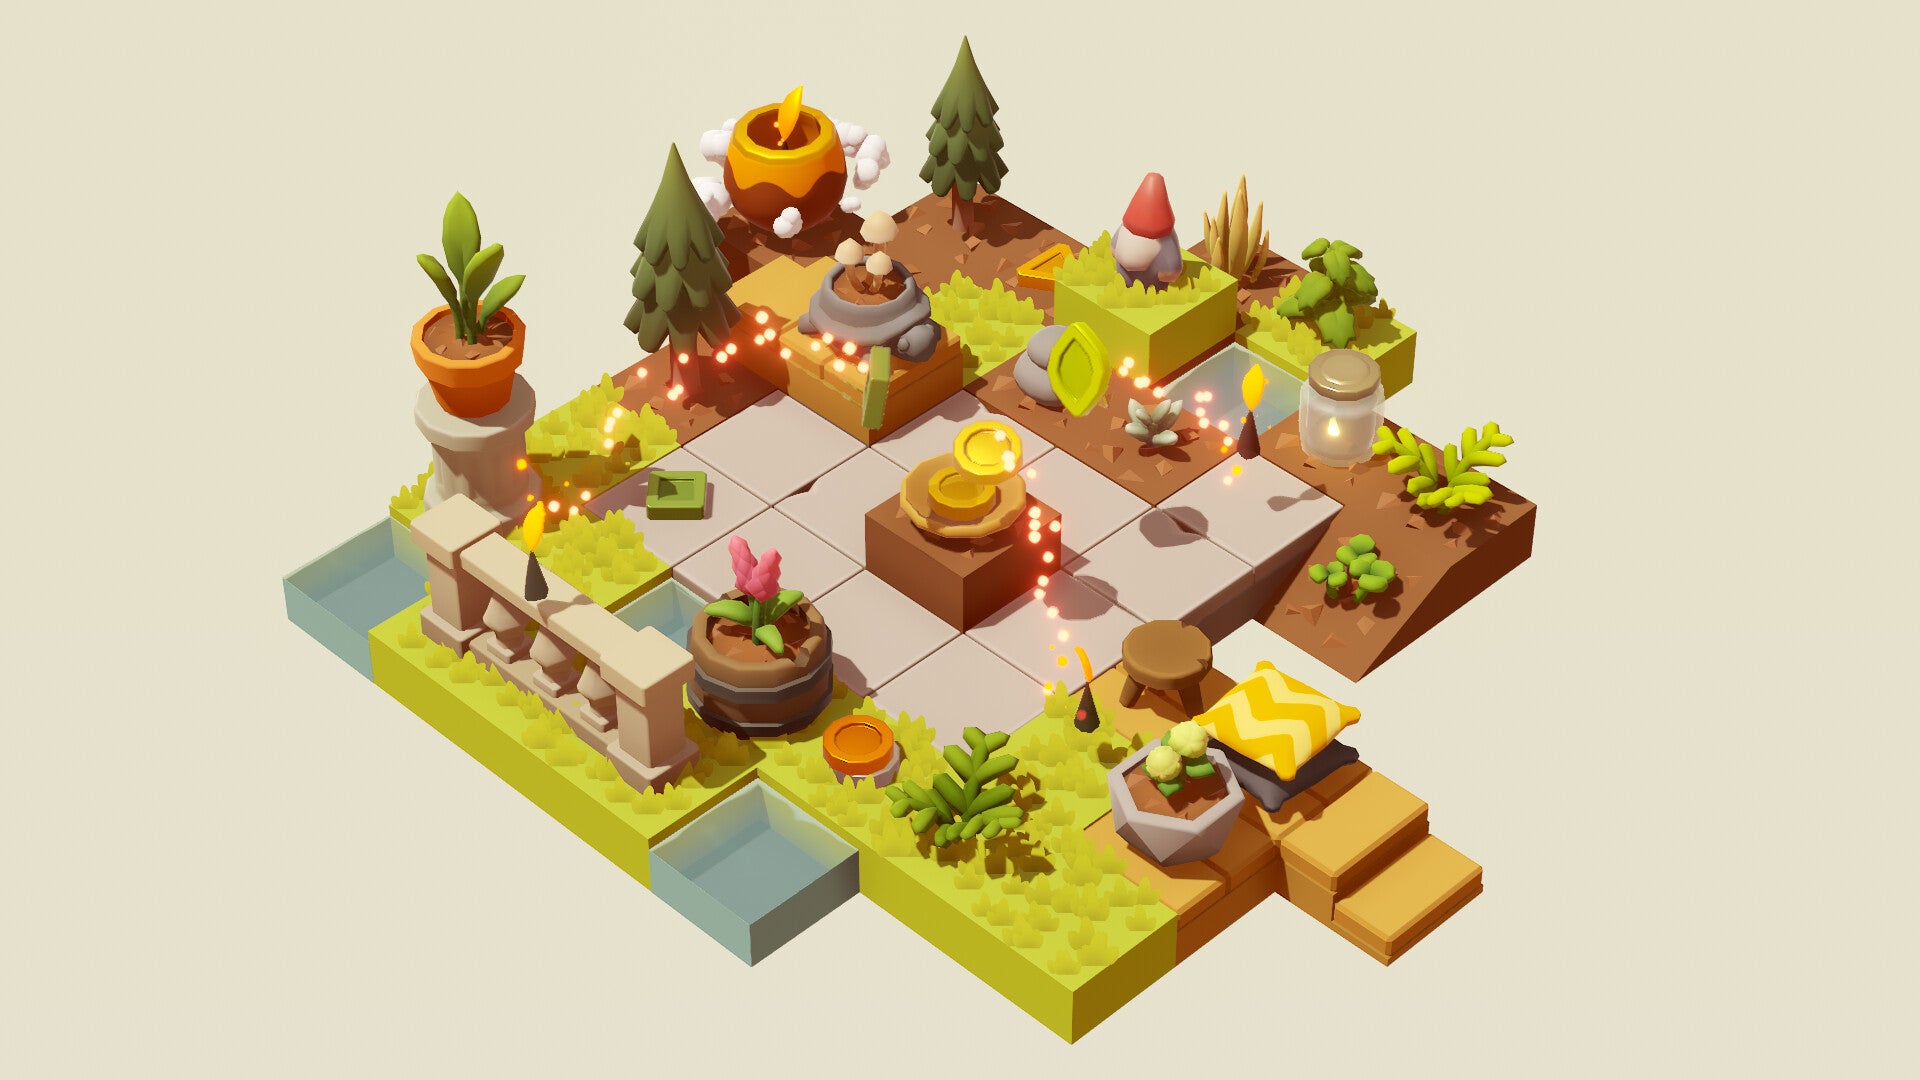 Garden Galaxy is a game about beautiful clutter